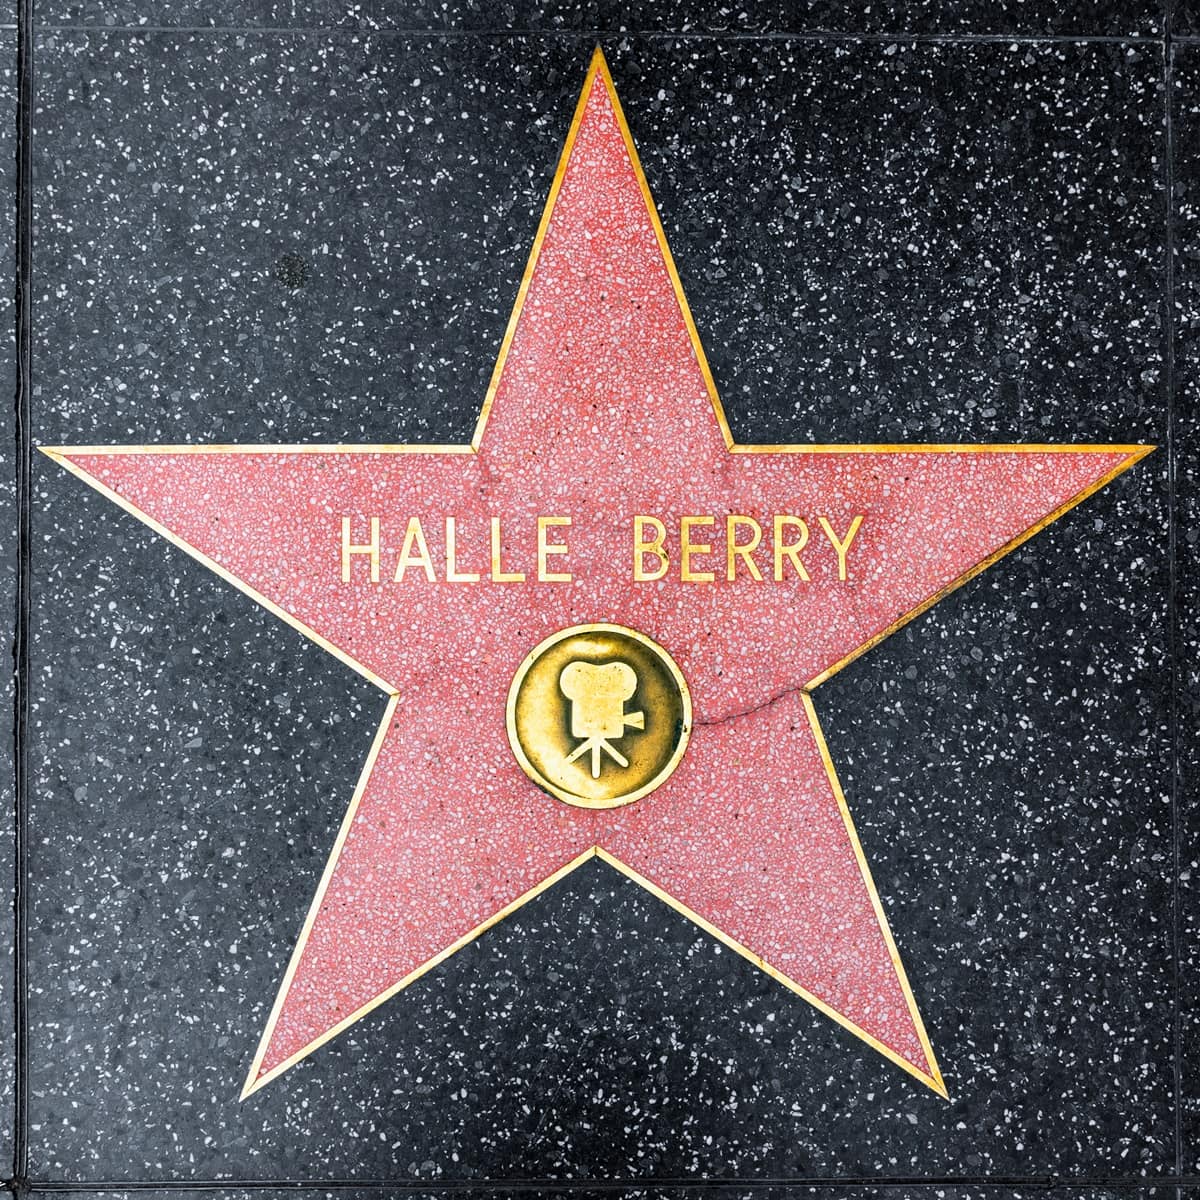 Halle Berry, the first African-American female to win an Oscar for leading actress, received the 2,333rd Walk of Fame Star in 2007